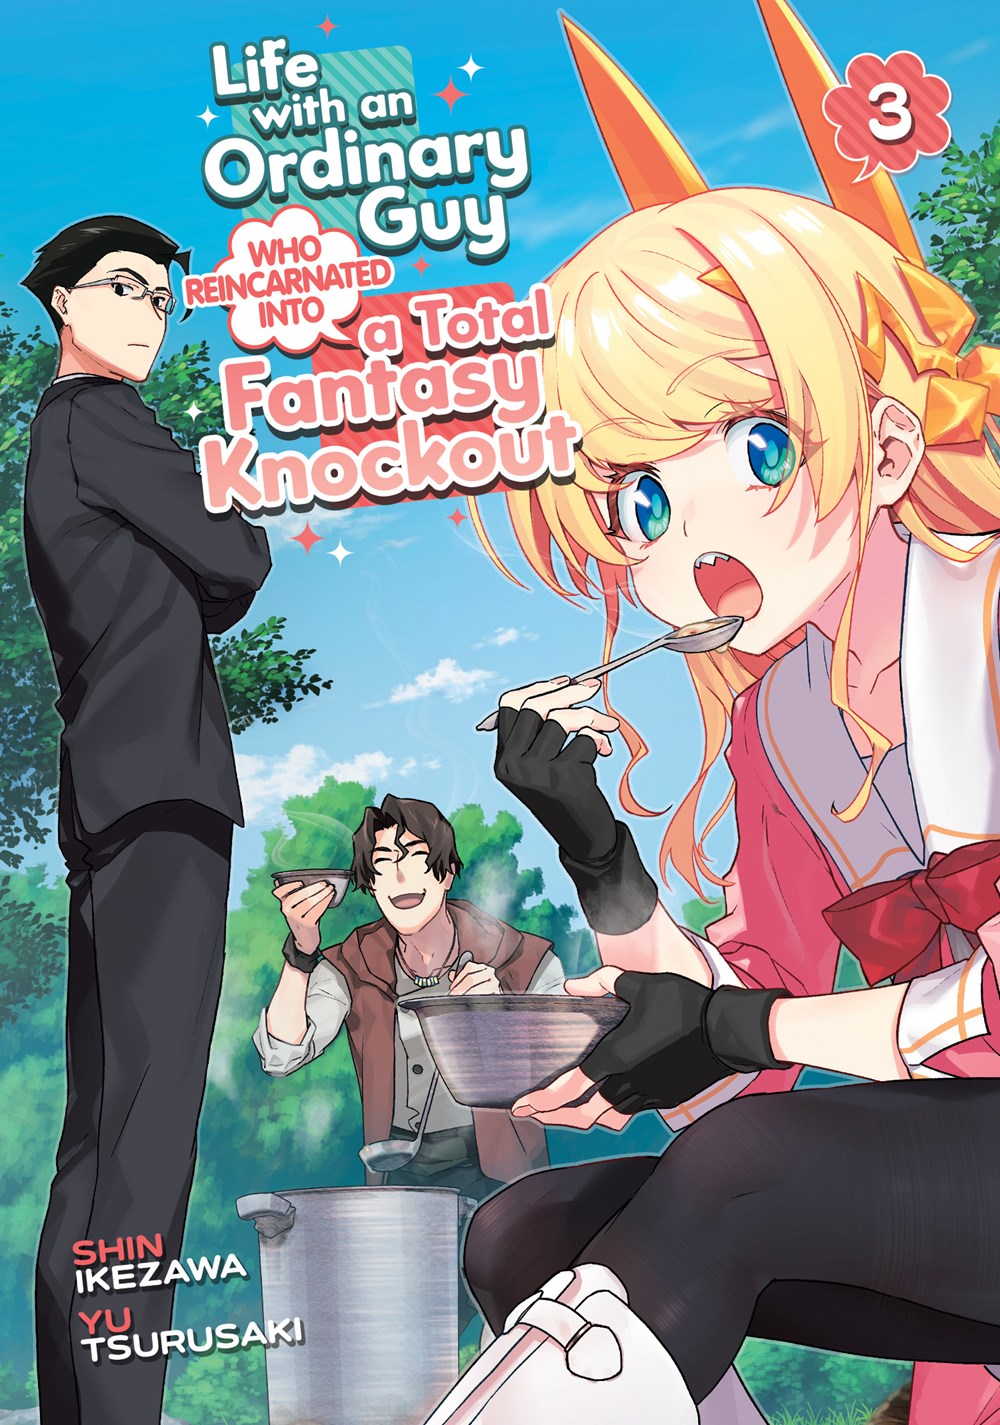 Life with an Ordinary Guy Who Reincarnated into a Total Fantasy Knockout  Manga - Read Manga Online Free